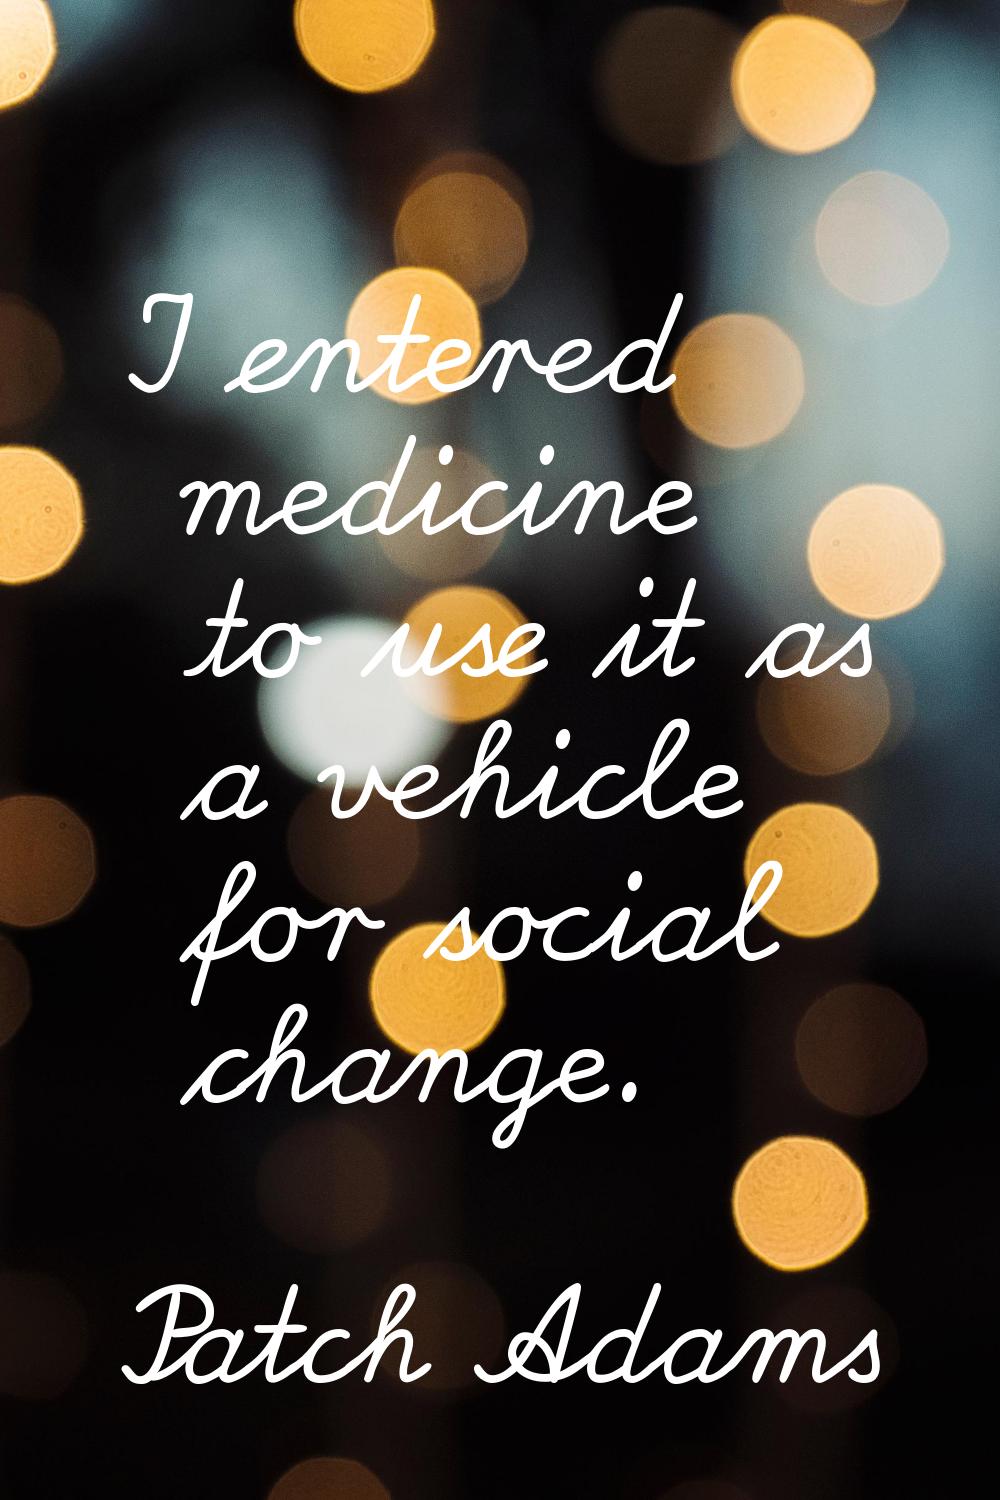 I entered medicine to use it as a vehicle for social change.